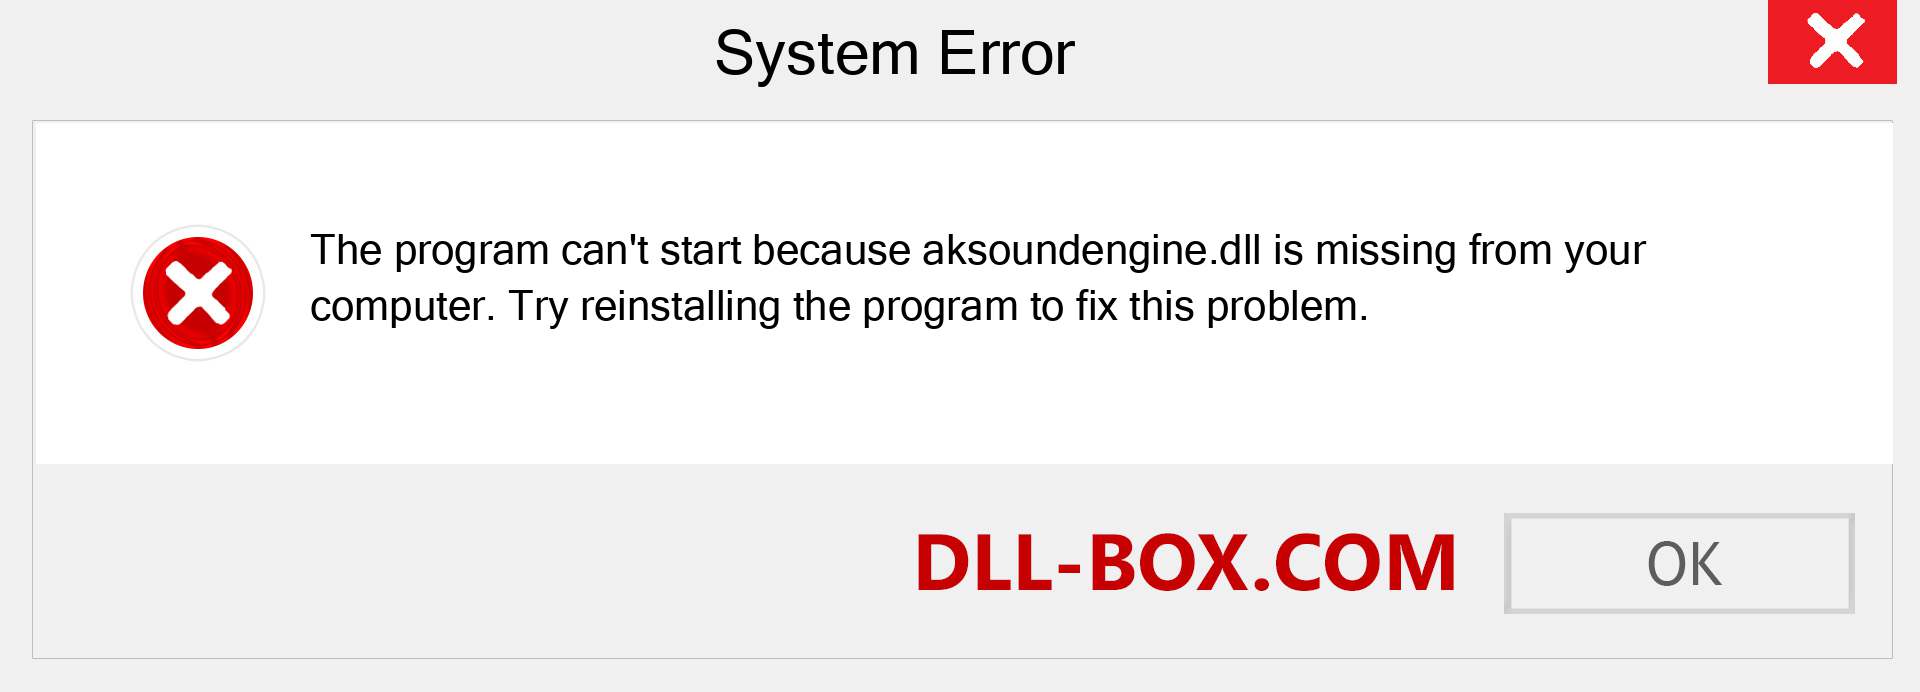  aksoundengine.dll file is missing?. Download for Windows 7, 8, 10 - Fix  aksoundengine dll Missing Error on Windows, photos, images